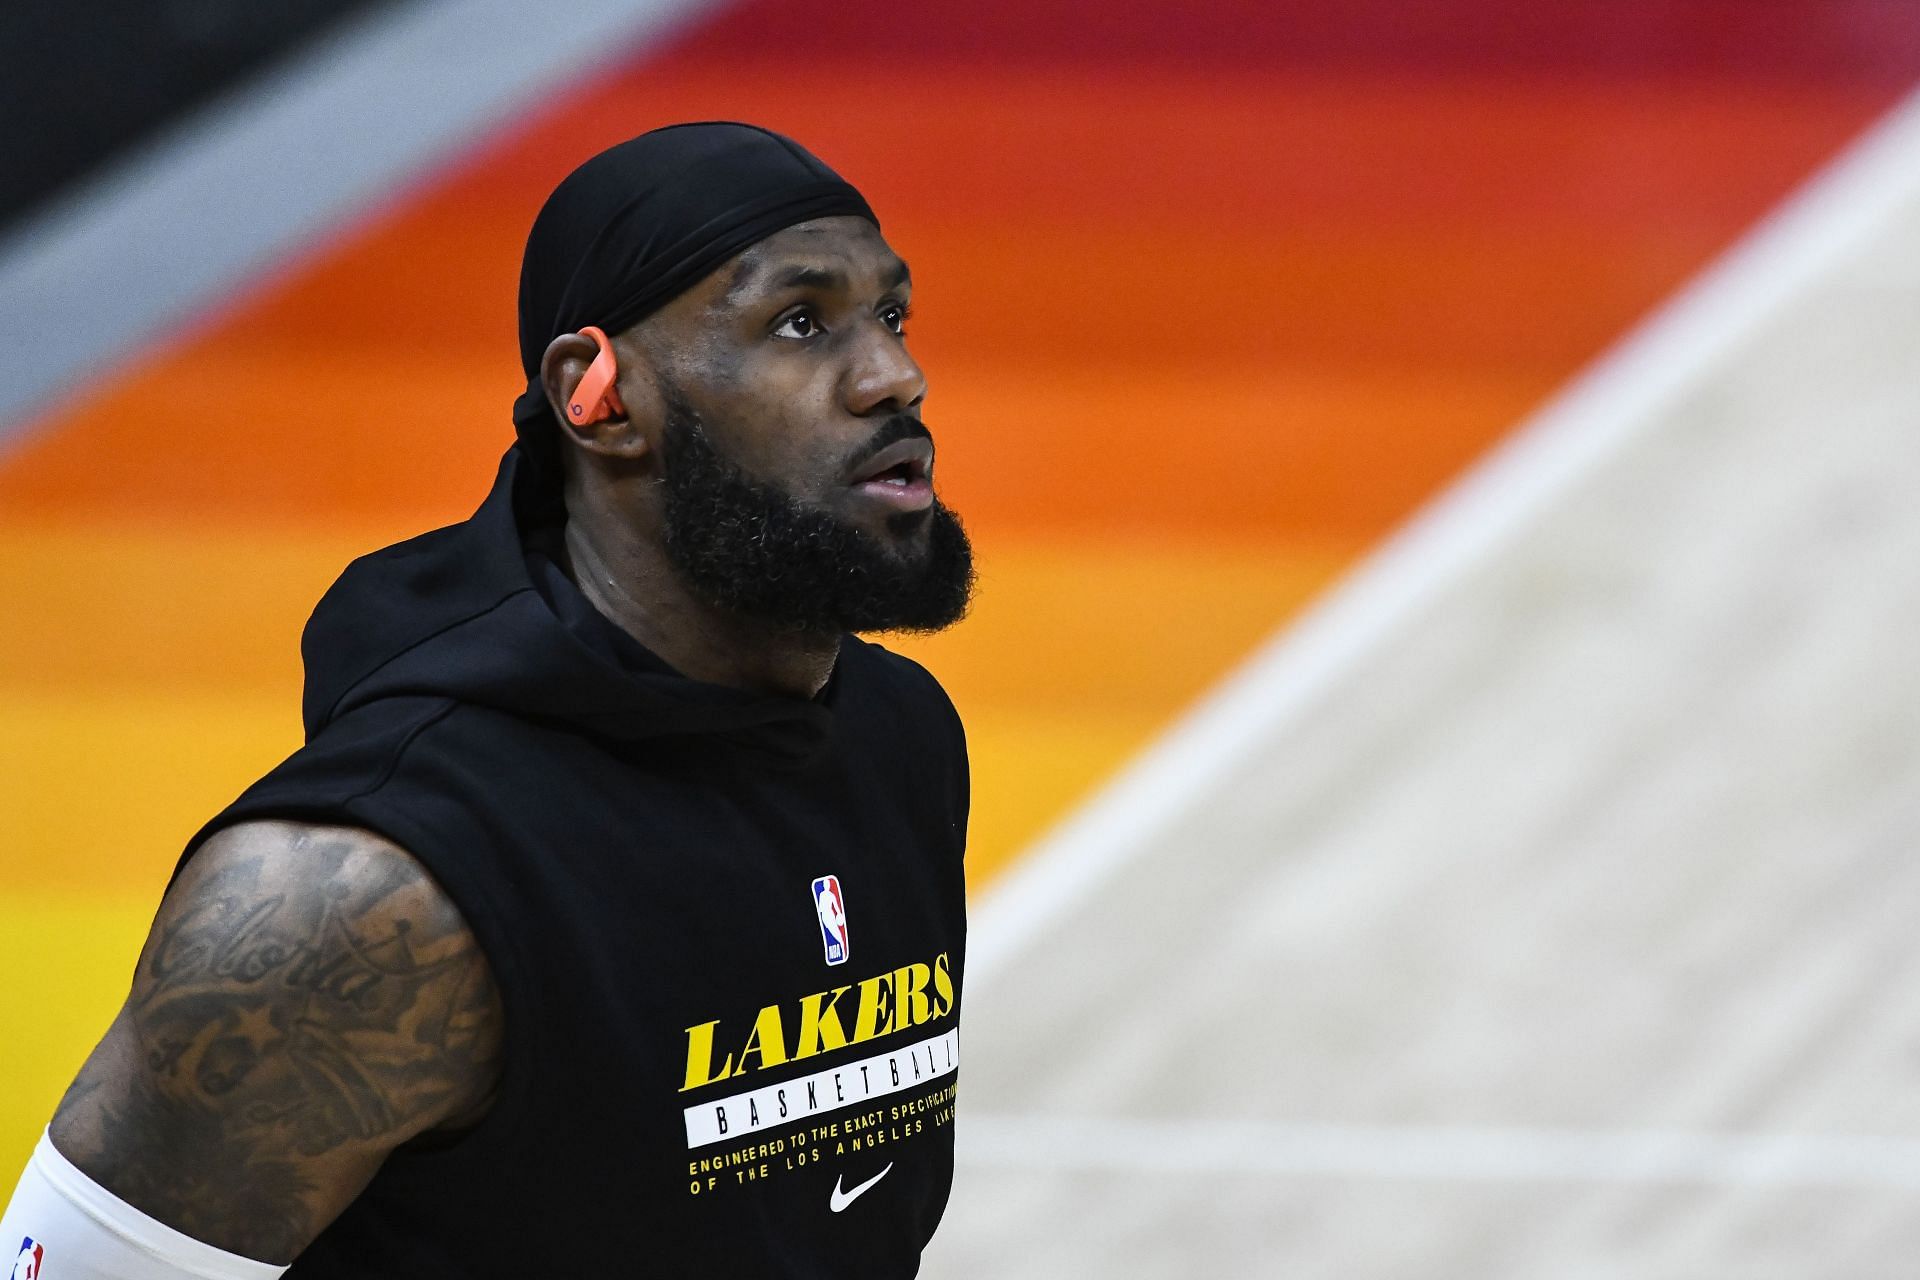 LeBron James will be looking to be back in fine shape and help the Lakers do better next season